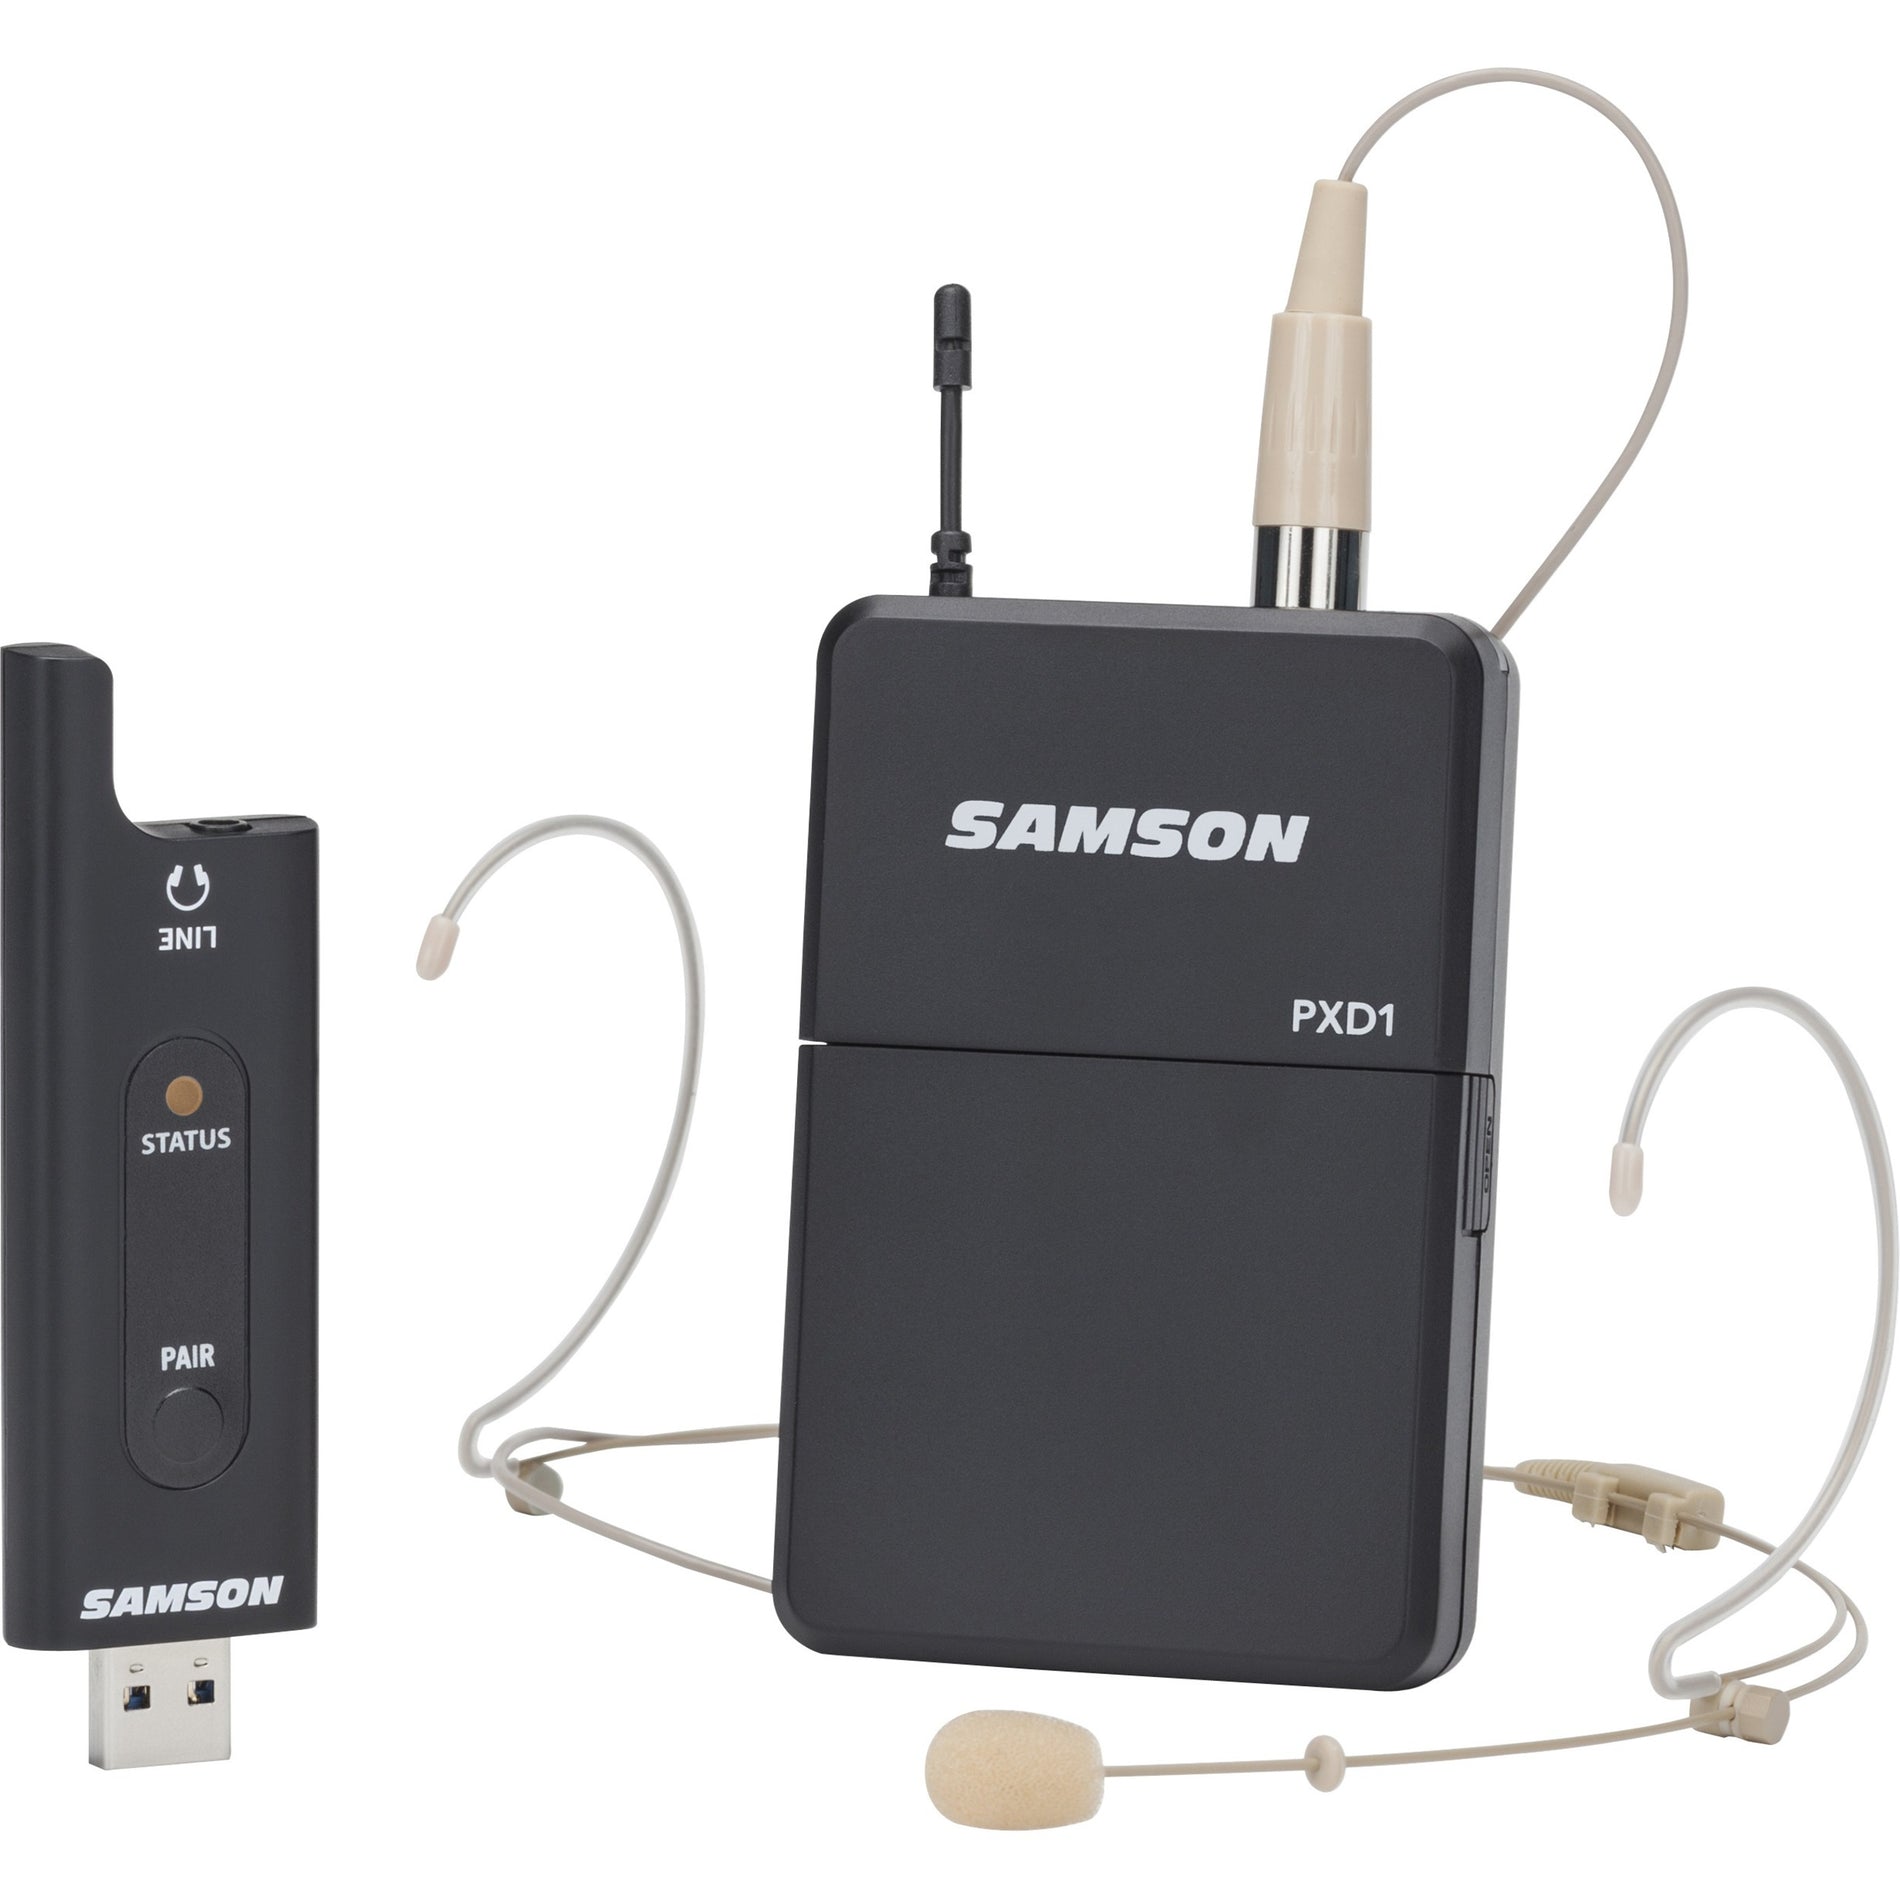 Samson SWXPD2BDE5 XPD2 Headset - USB Digital Wireless System, 100 ft Operating Range, 20 Hz - 16 kHz Frequency Response, 85 dB Signal to Noise Ratio